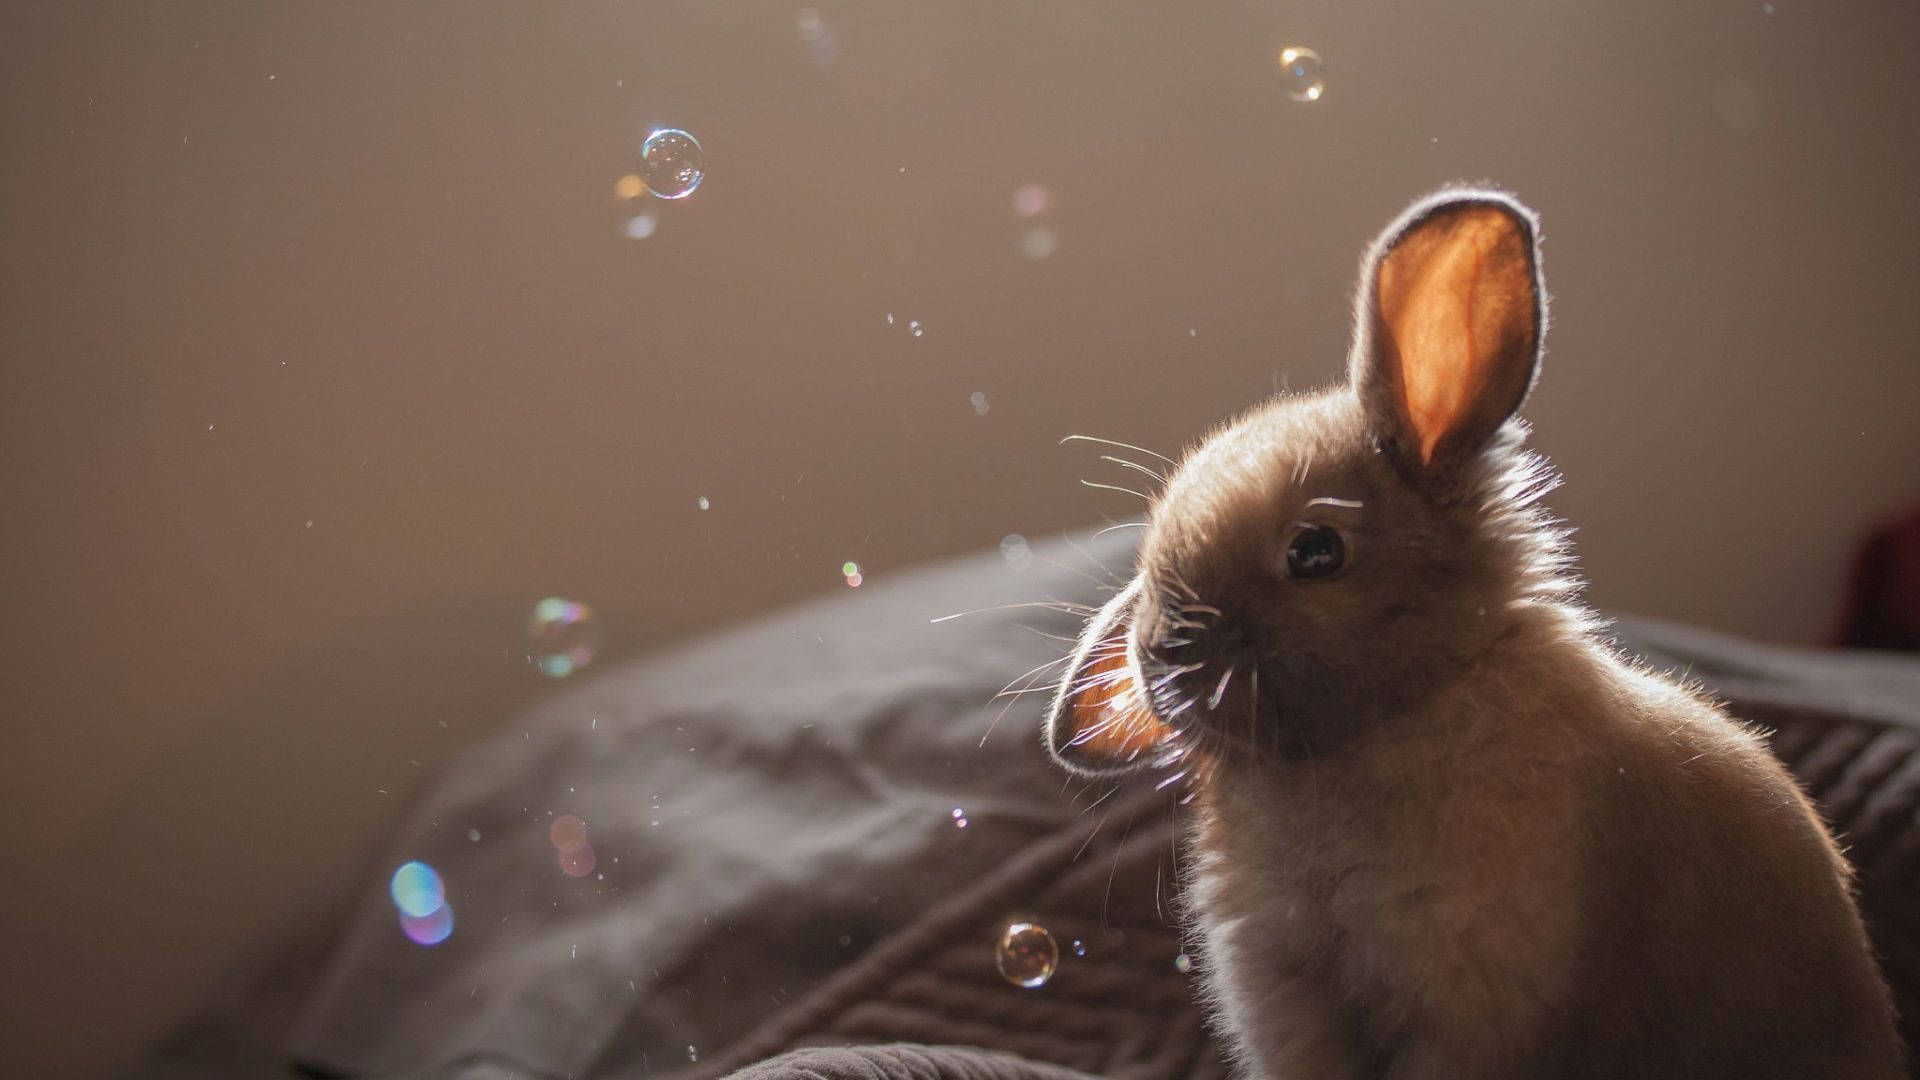 Baby Bunny And Bubbles Wallpaper